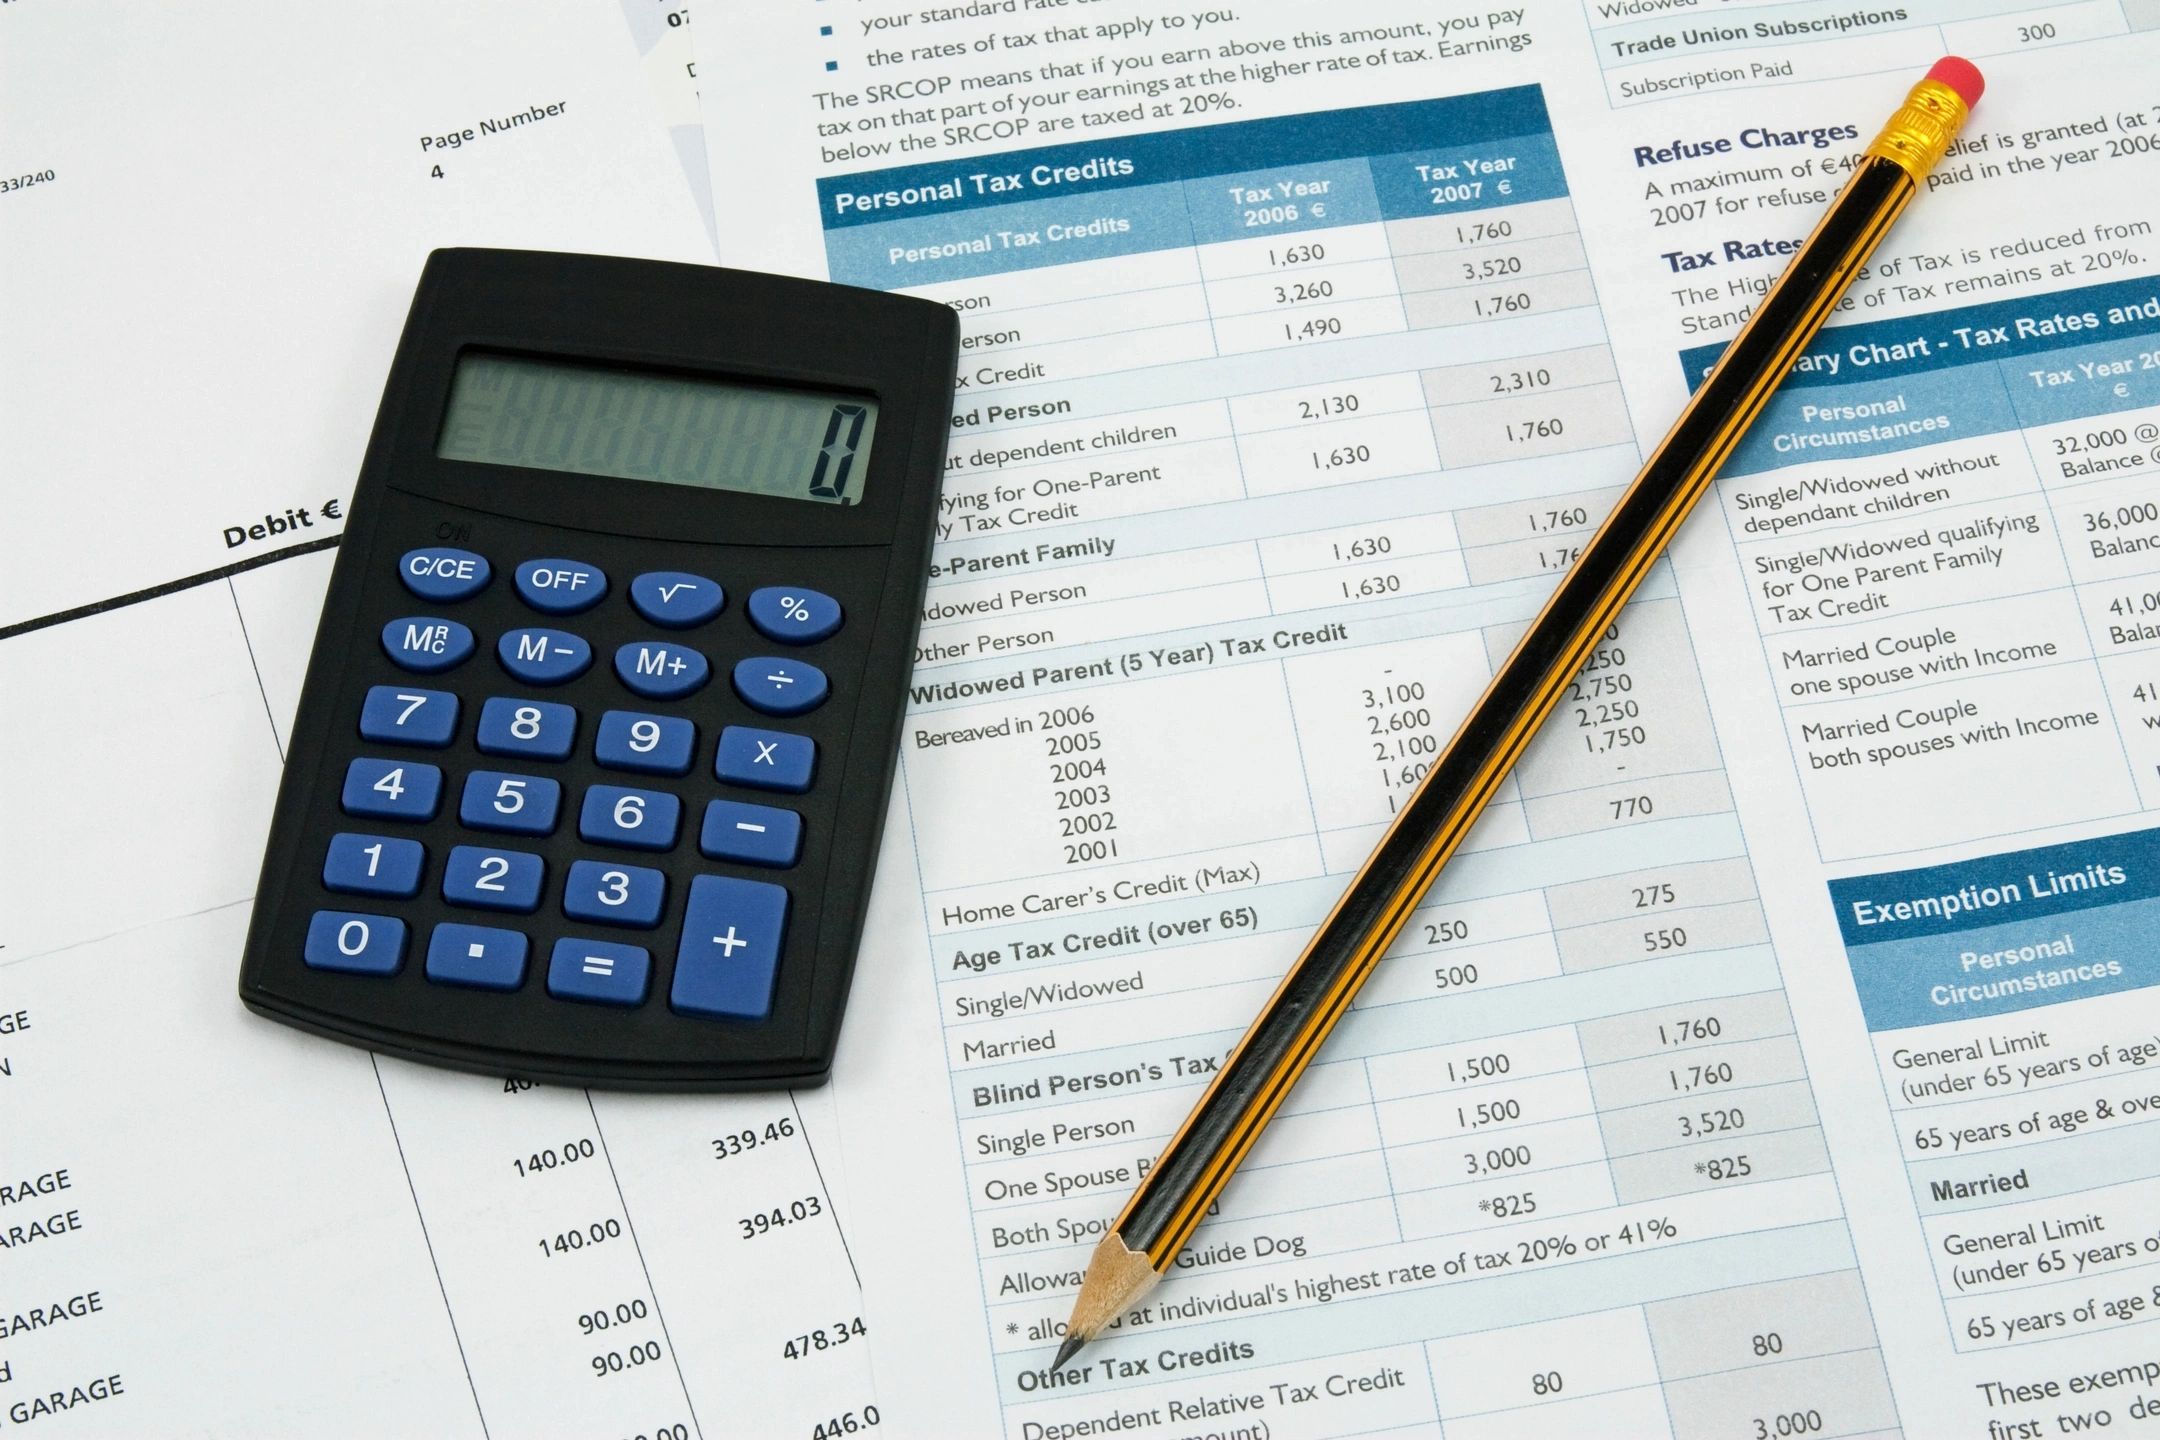 Calculator and pencil on top of tax forms and financial documents, symbolizing financial services and accounting.